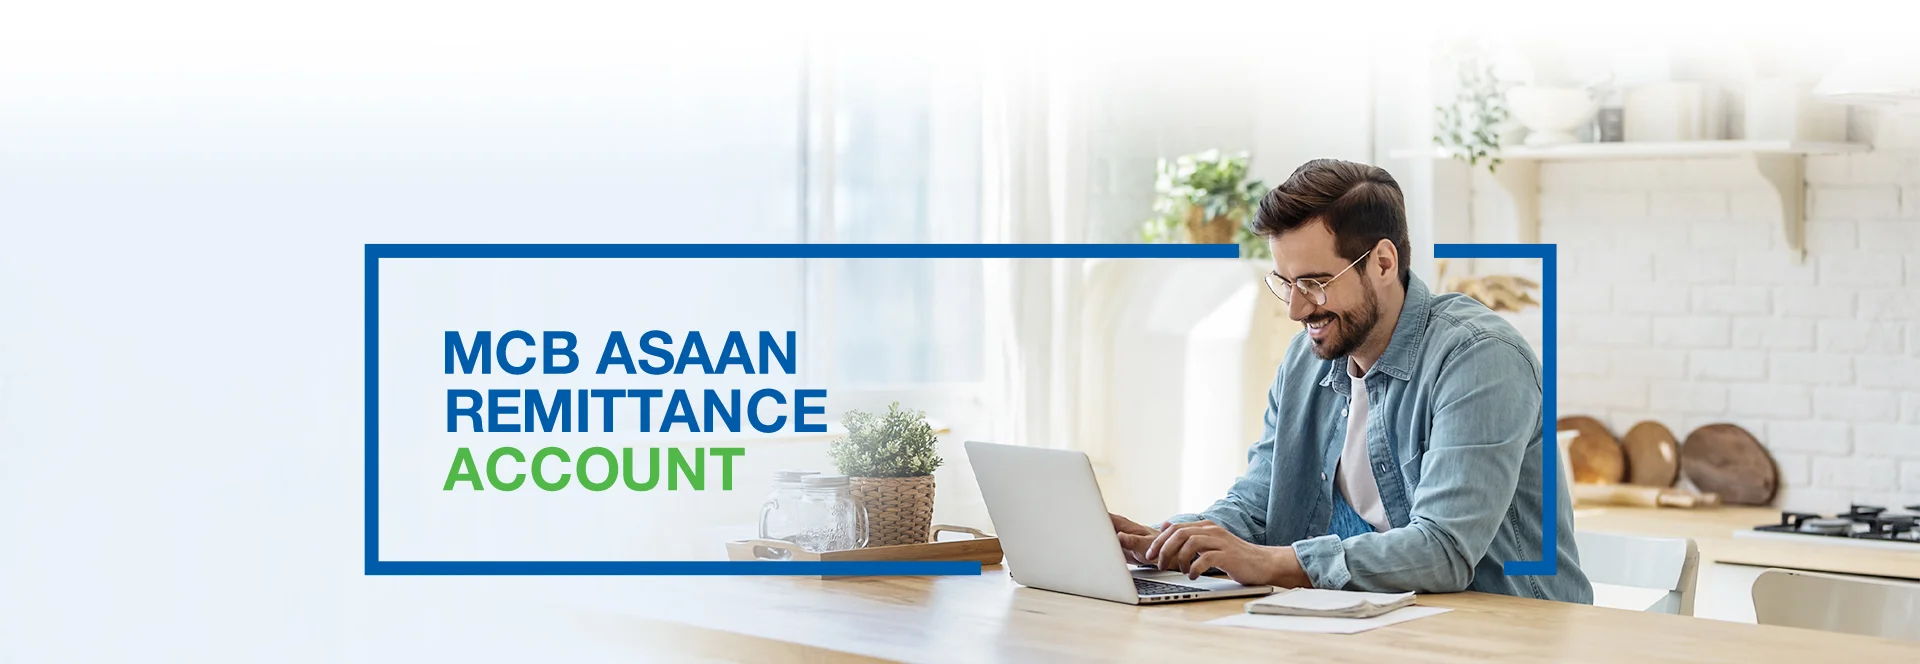 MCB Asaan Remittance Account